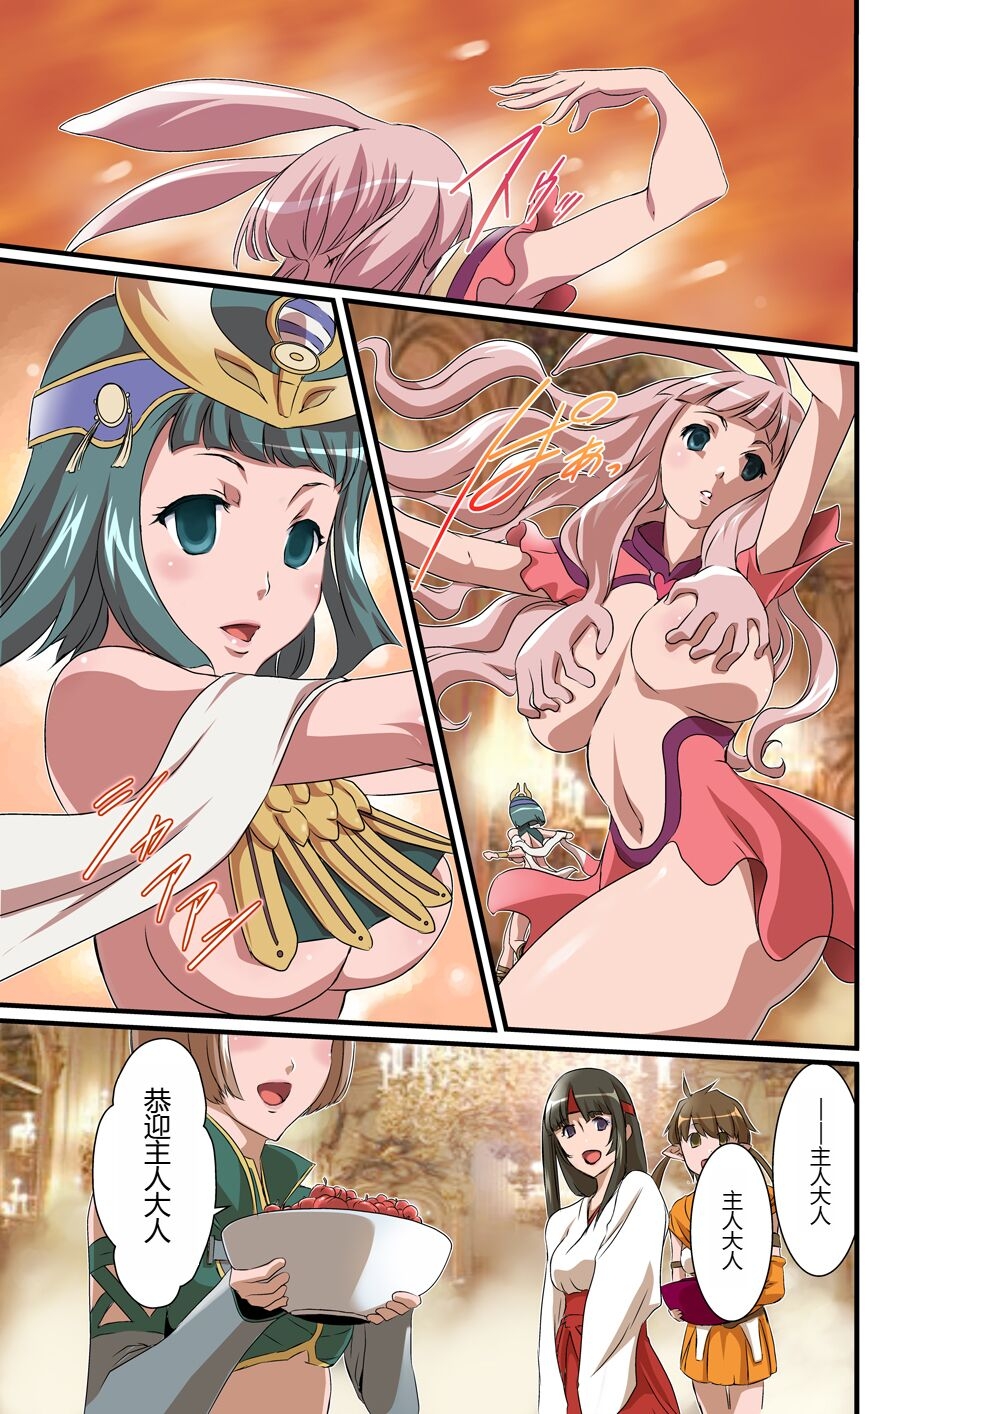 [Utsuro na Hitomi] Queen's *lade Mind-control Manga (Queen's Blade) [chinese] [lalala1234个人机翻汉化] 16